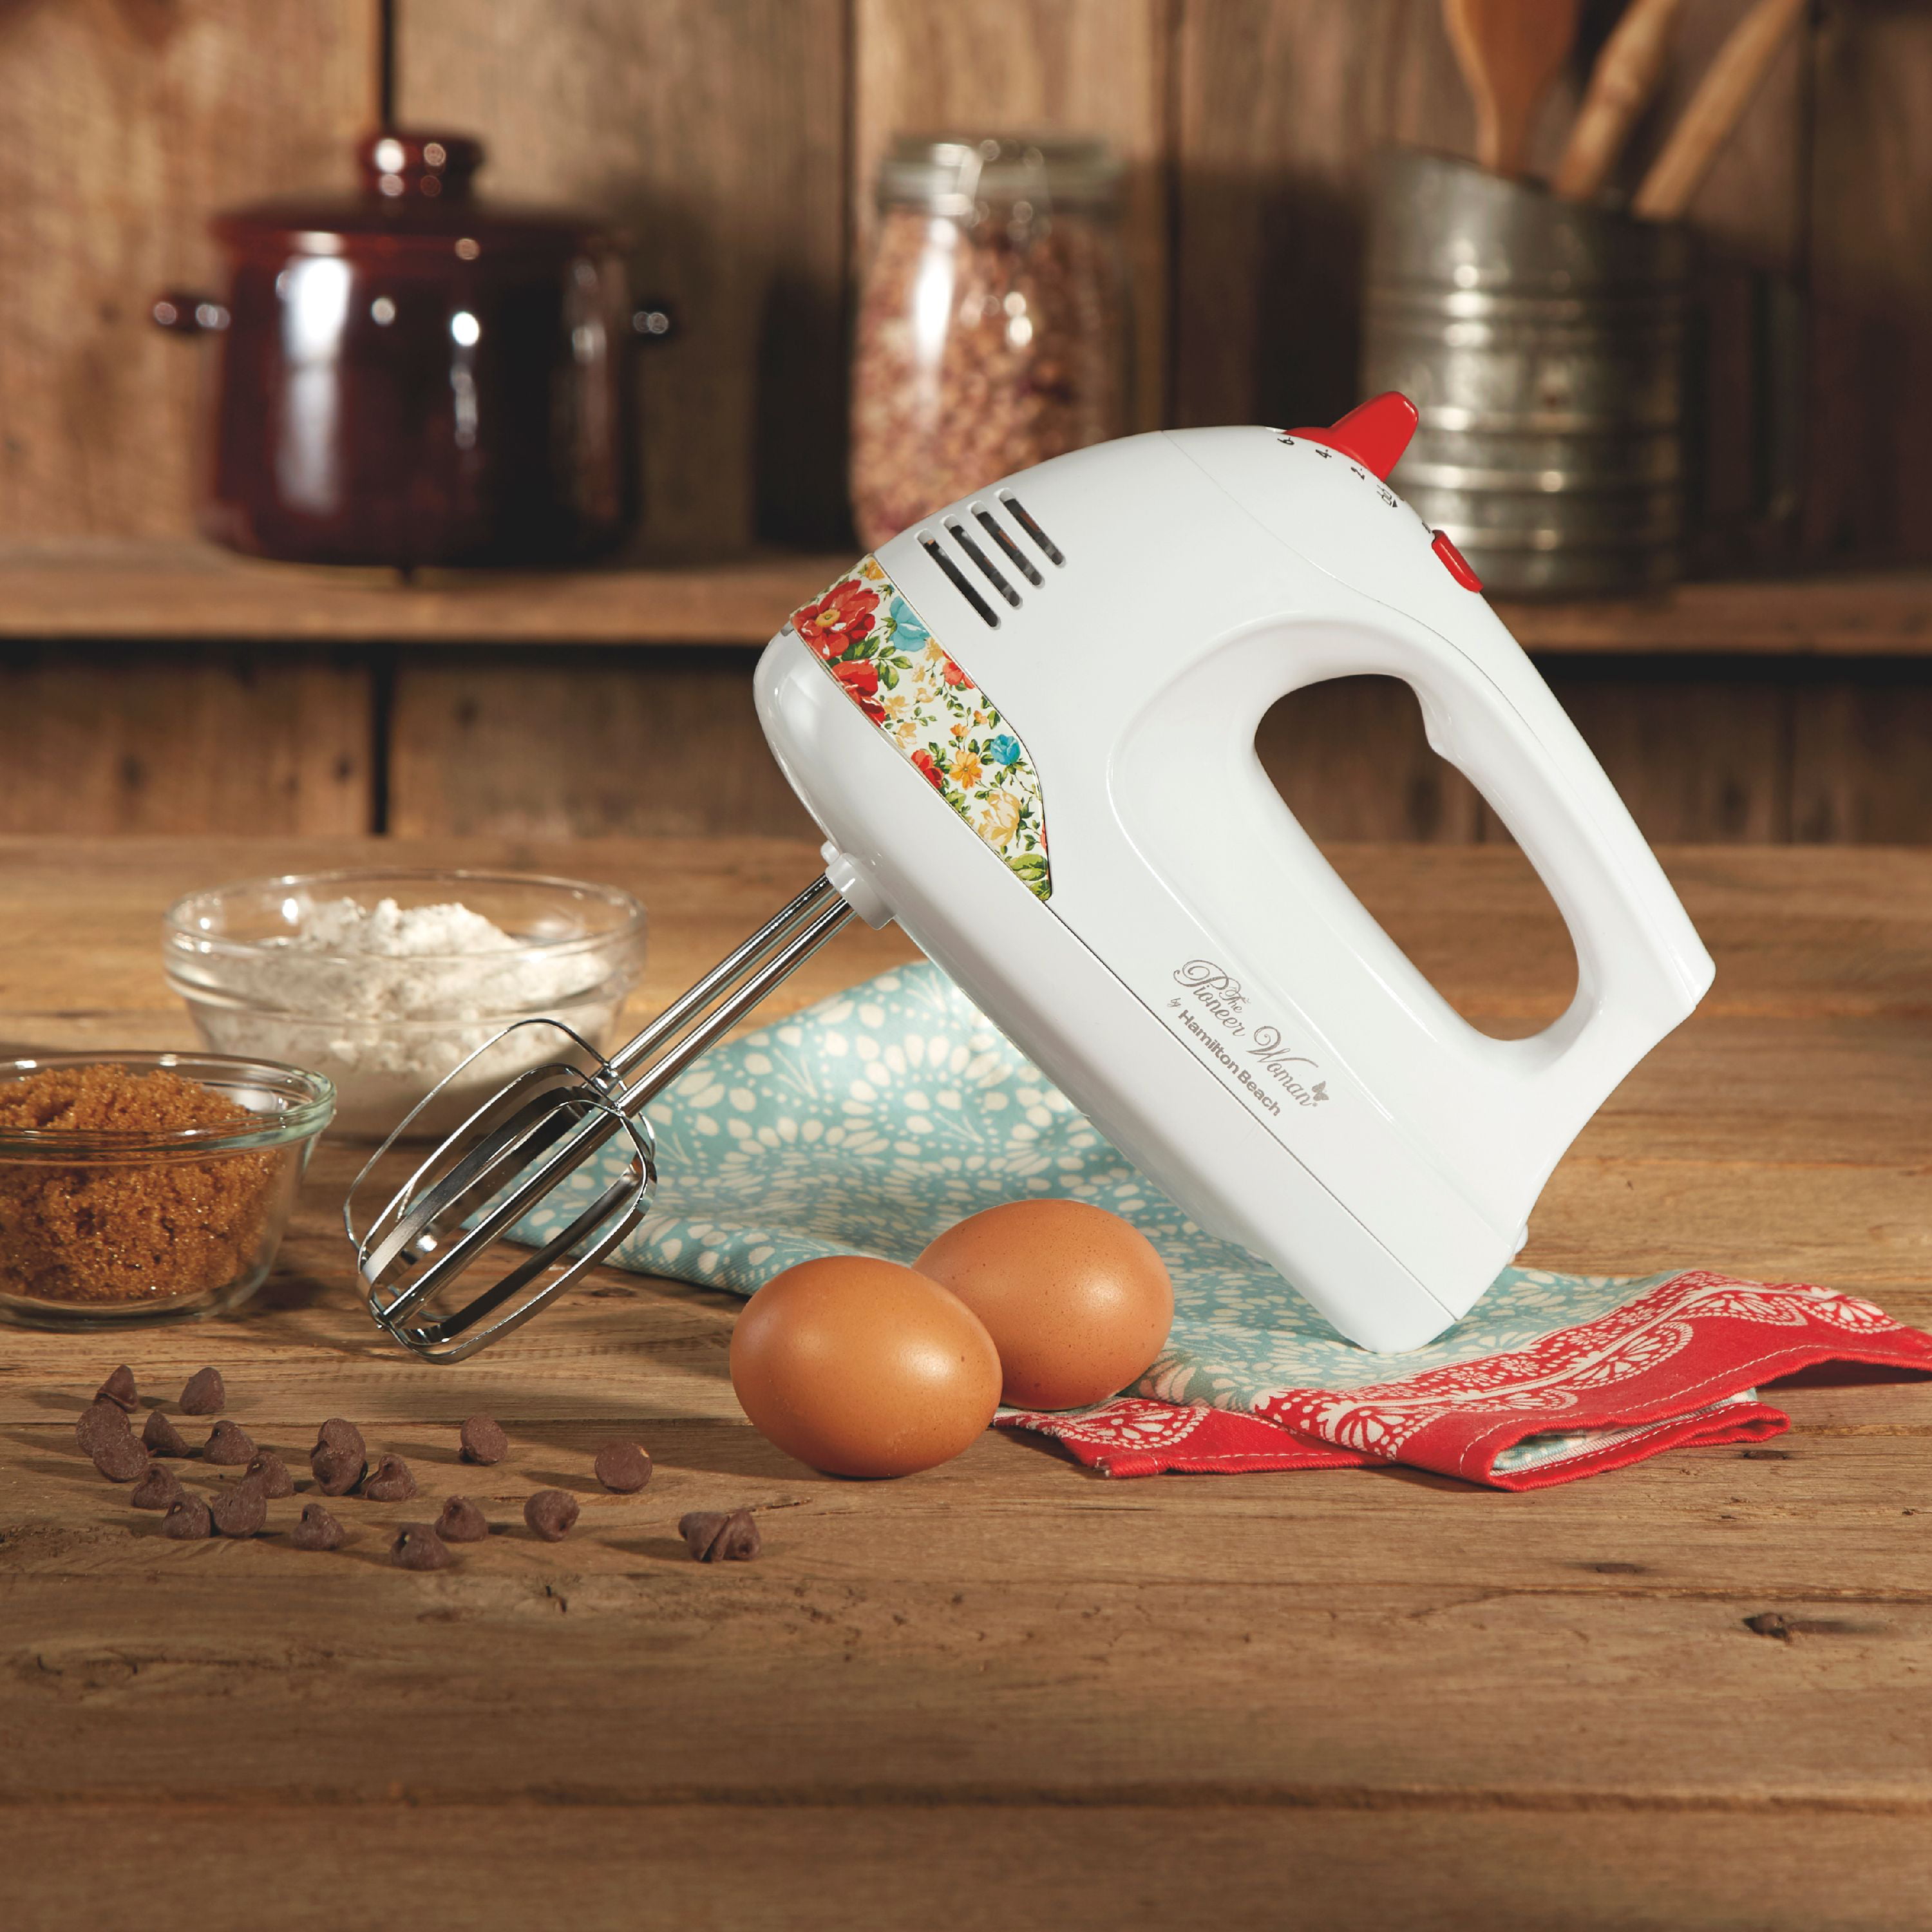 Cordless Rechargeable Hand Mixer – Premadonna Cookware